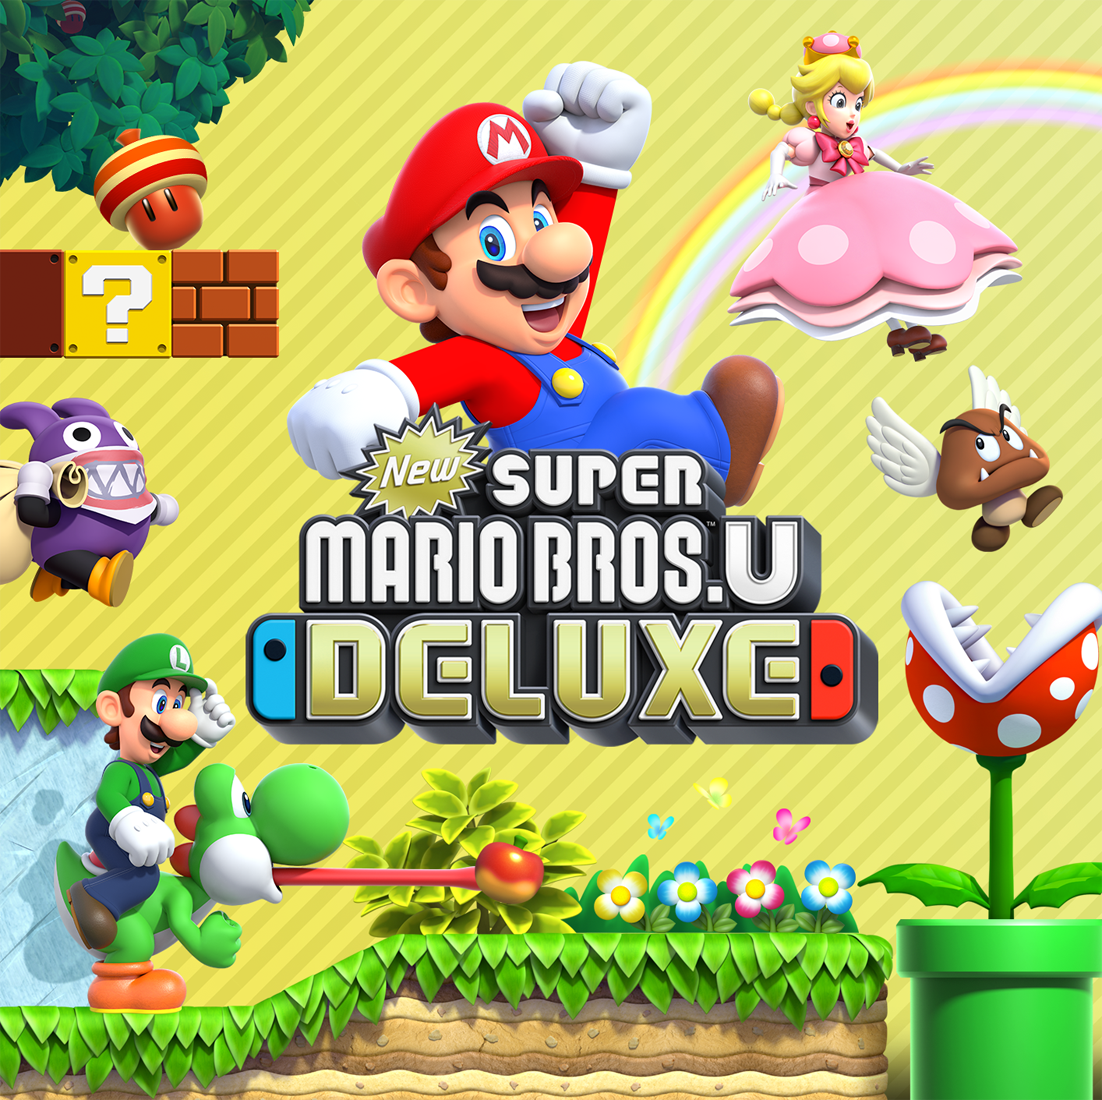 New Super Mario Bros. is a platform video game in the New Super Mario Bros. series developed by Nintendo for the Nintendo DS. It was first released in May 2006 in North America and Japan and in PAL regions the following month.